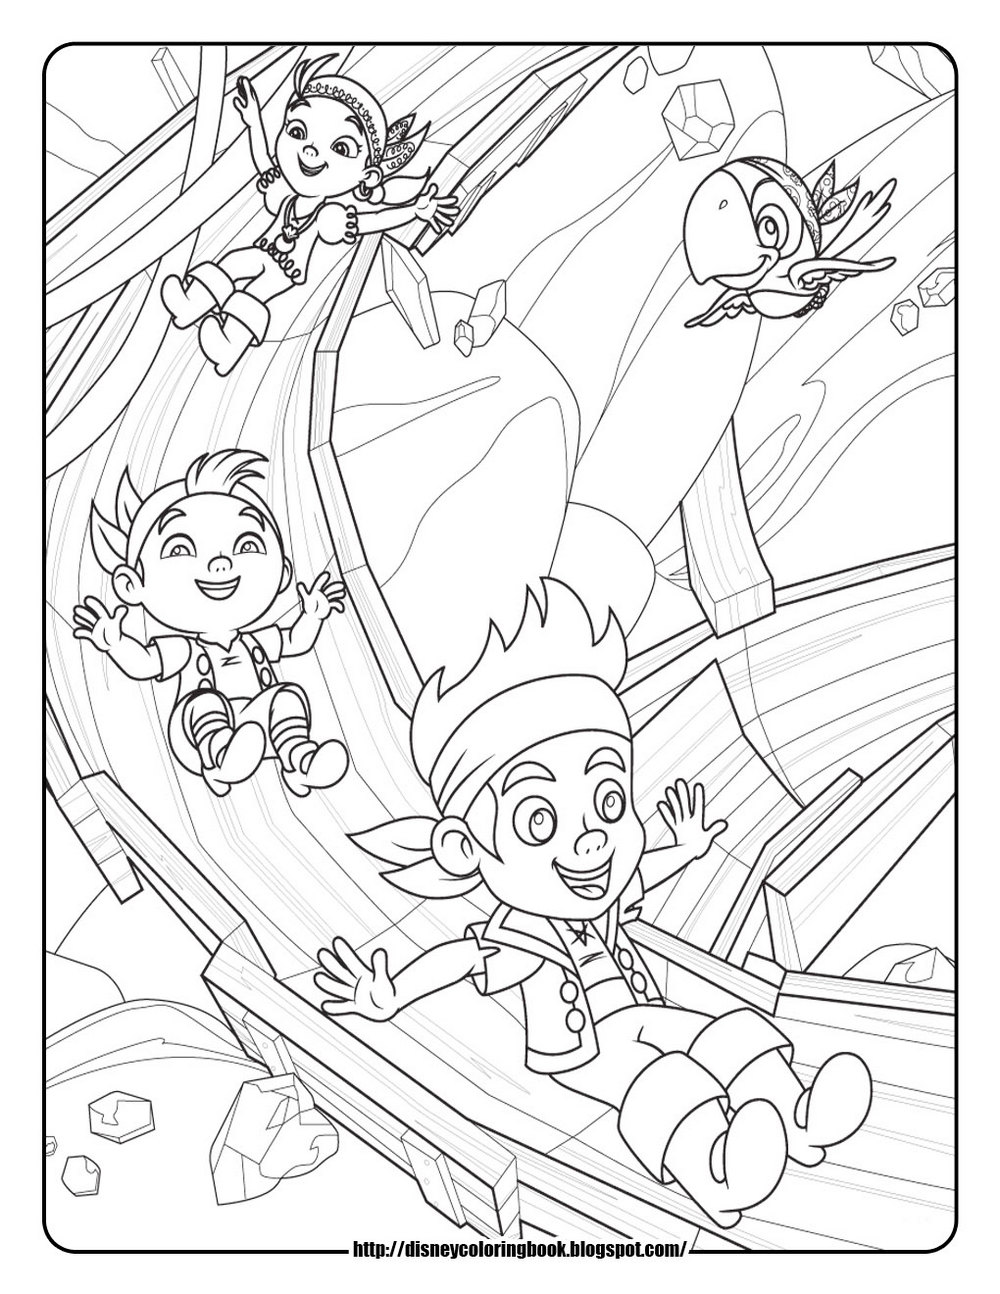 jake-and-the-never-land-pirates-coloring-printable